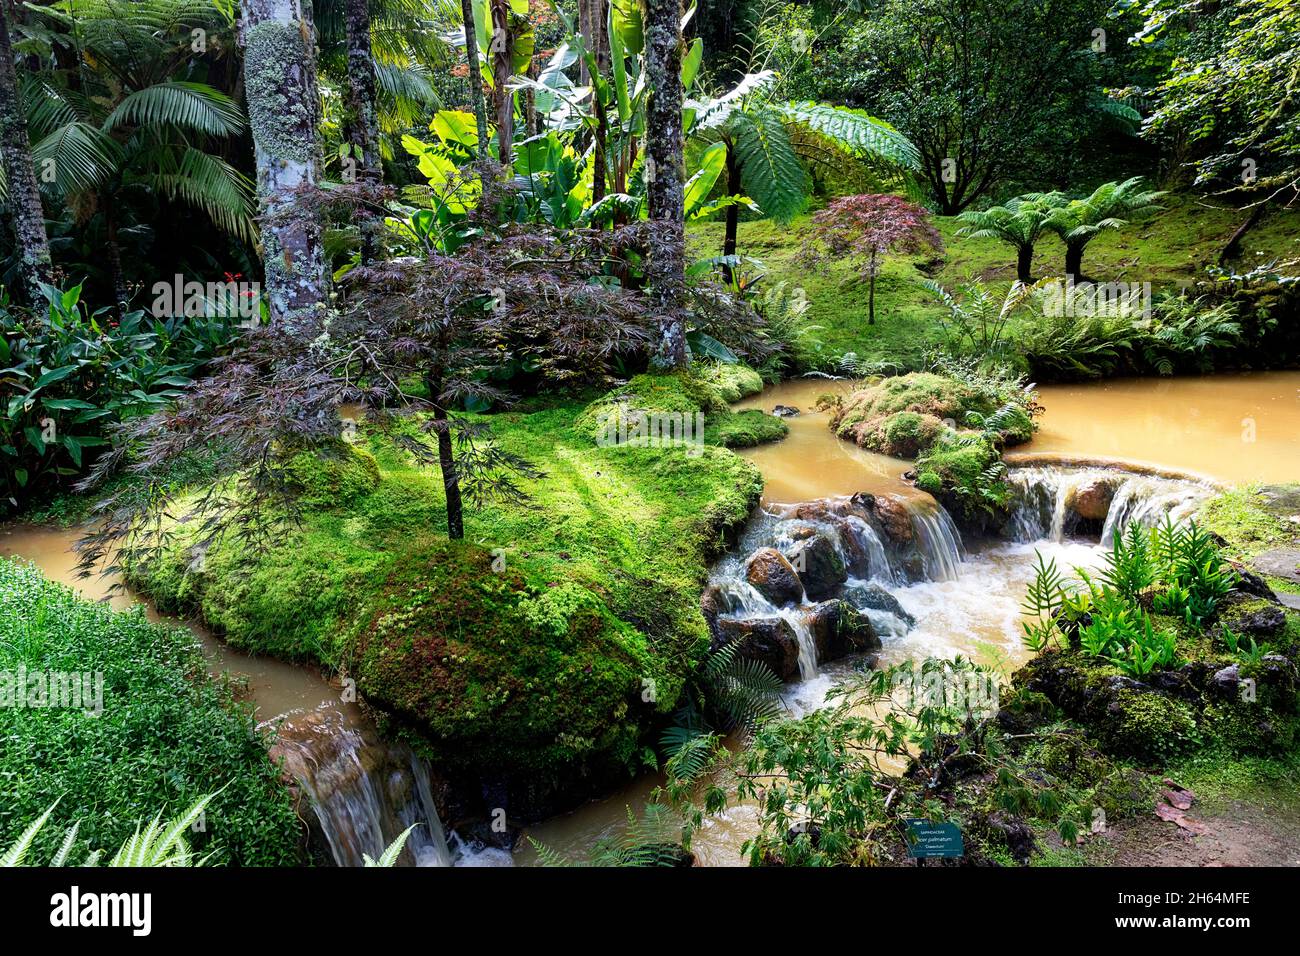 Portugal, Azores, Sao Miguel Island, Furnas. Lush exotic forest and water stream in Terra Nostra Garden Stock Photo